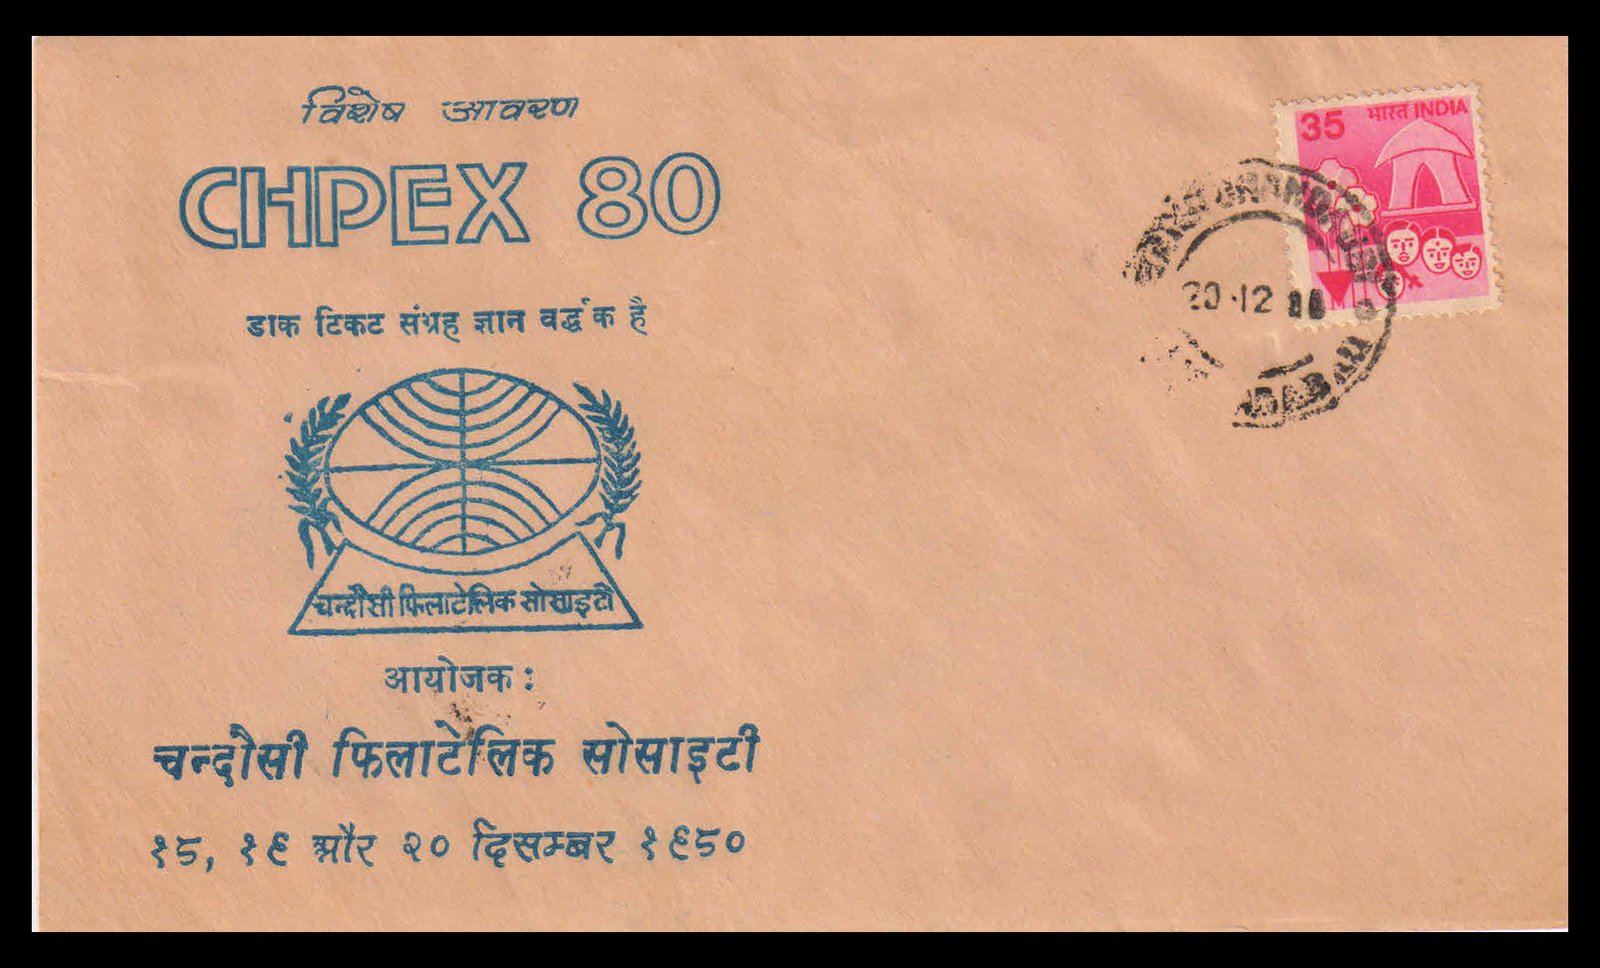 INDIA CHPEX 80 Stamp Exhibition. Chandusi Philatelic Society Special Cover Dated 20-12-1980